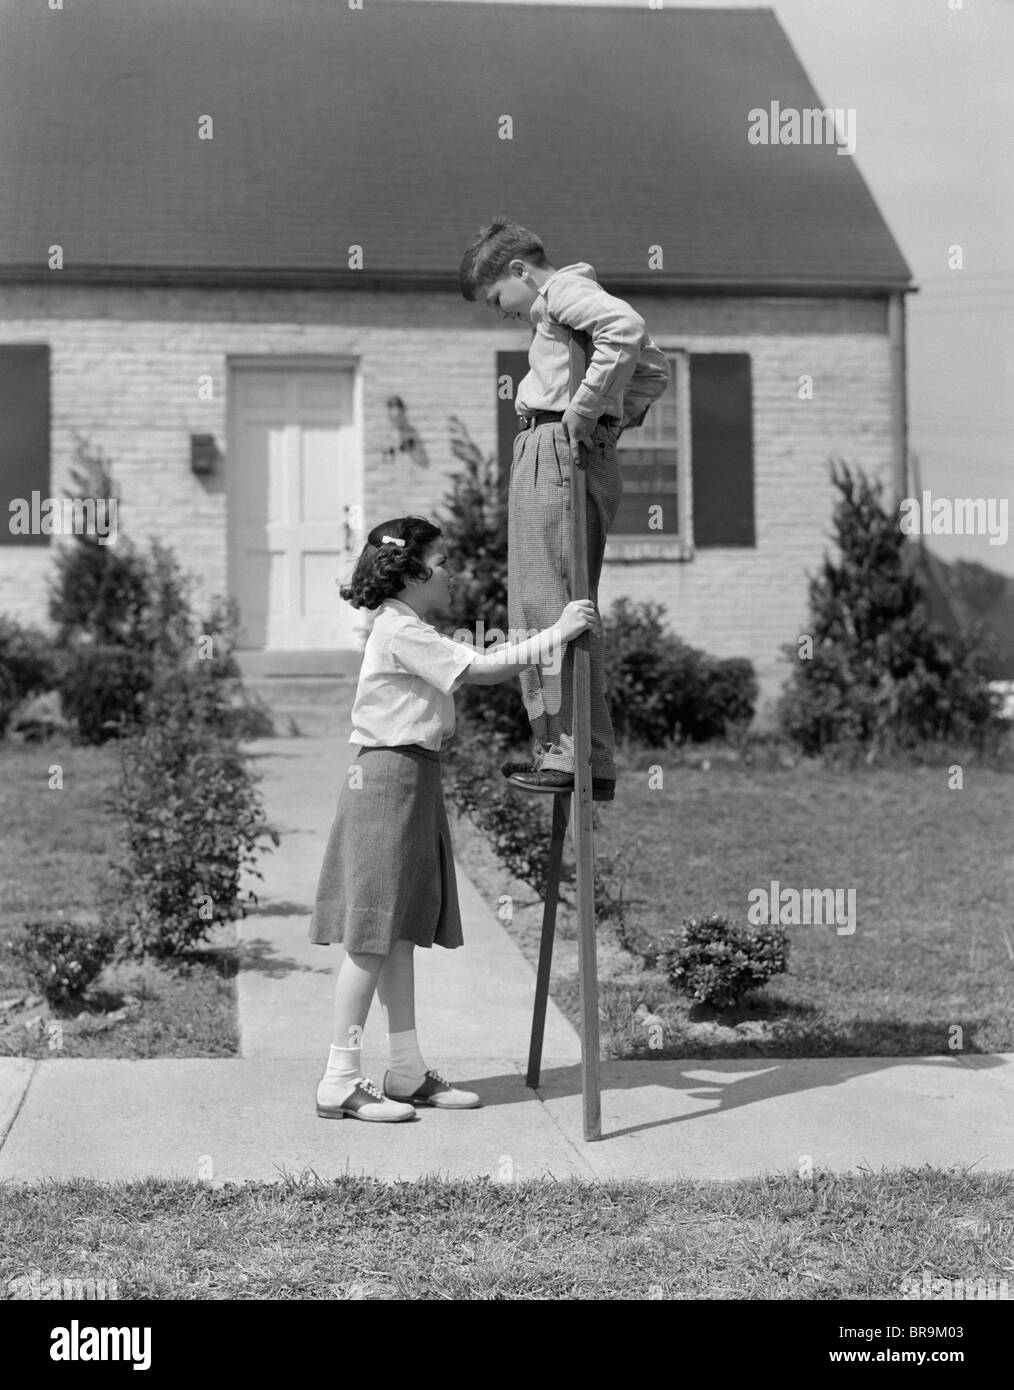 1950s CHILDREN BOY AND GIRL PLAYING WITH STILTS STANDING WALKING ON SIDEWALK Stock Photo